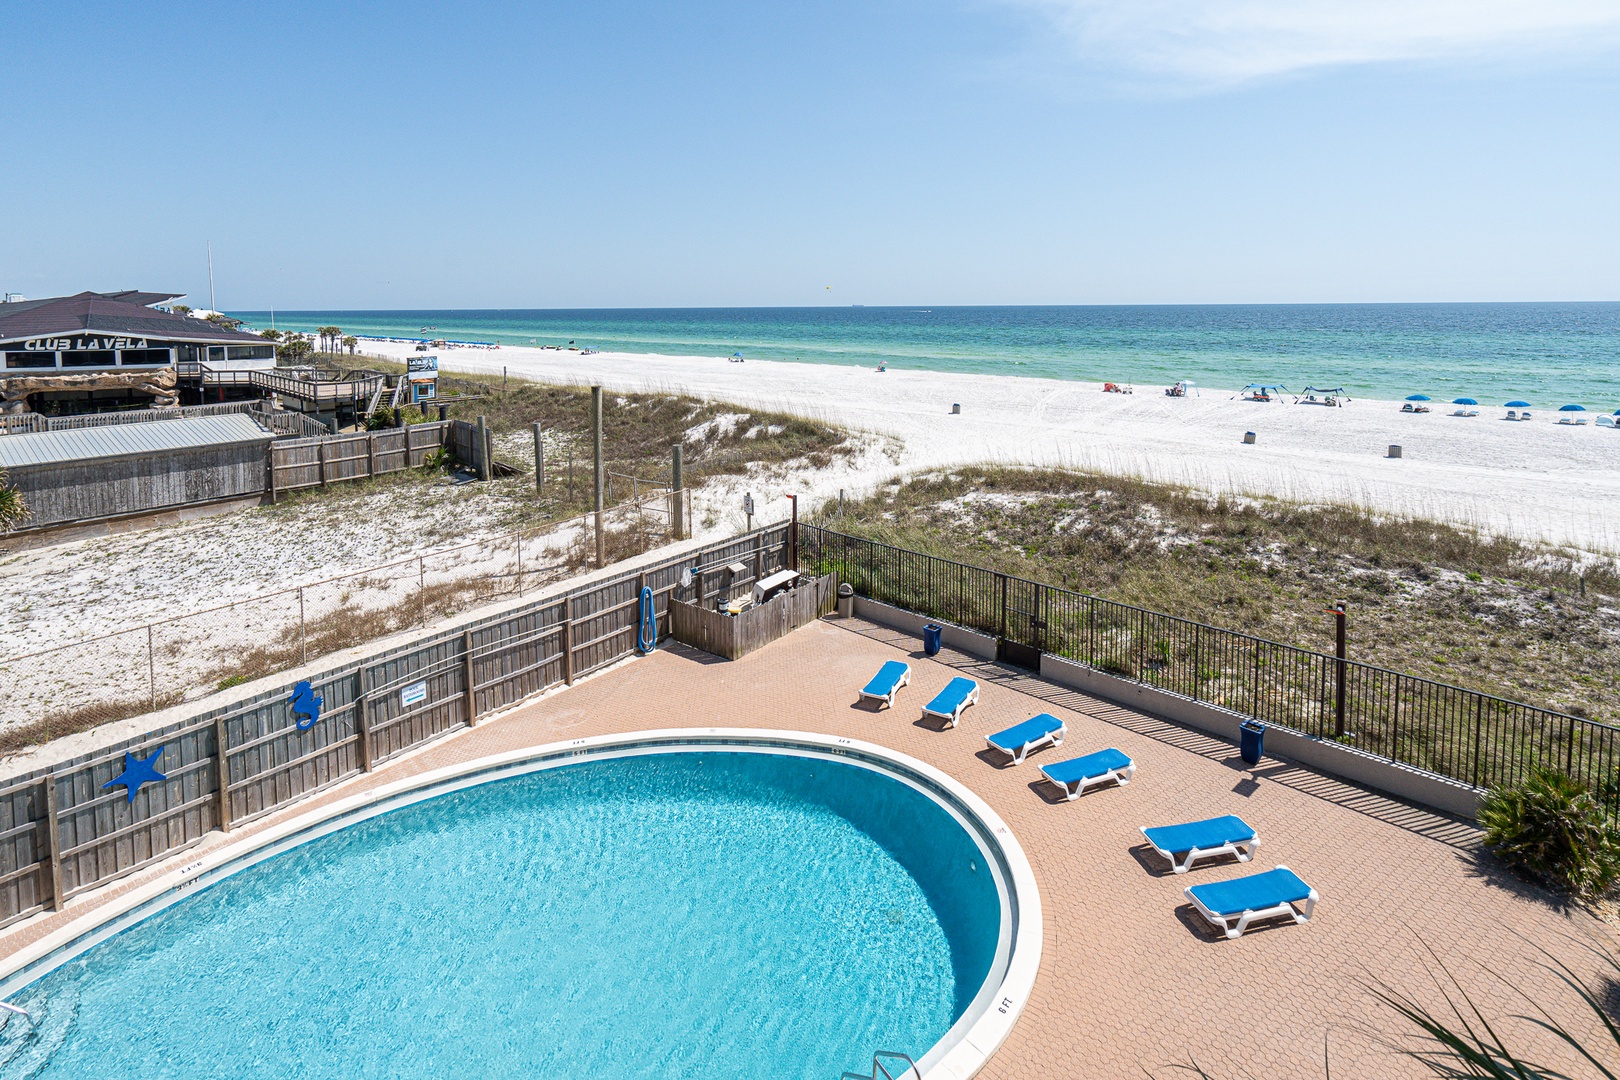 Indulge in the complex amenities and soak in the breathtaking beach view.